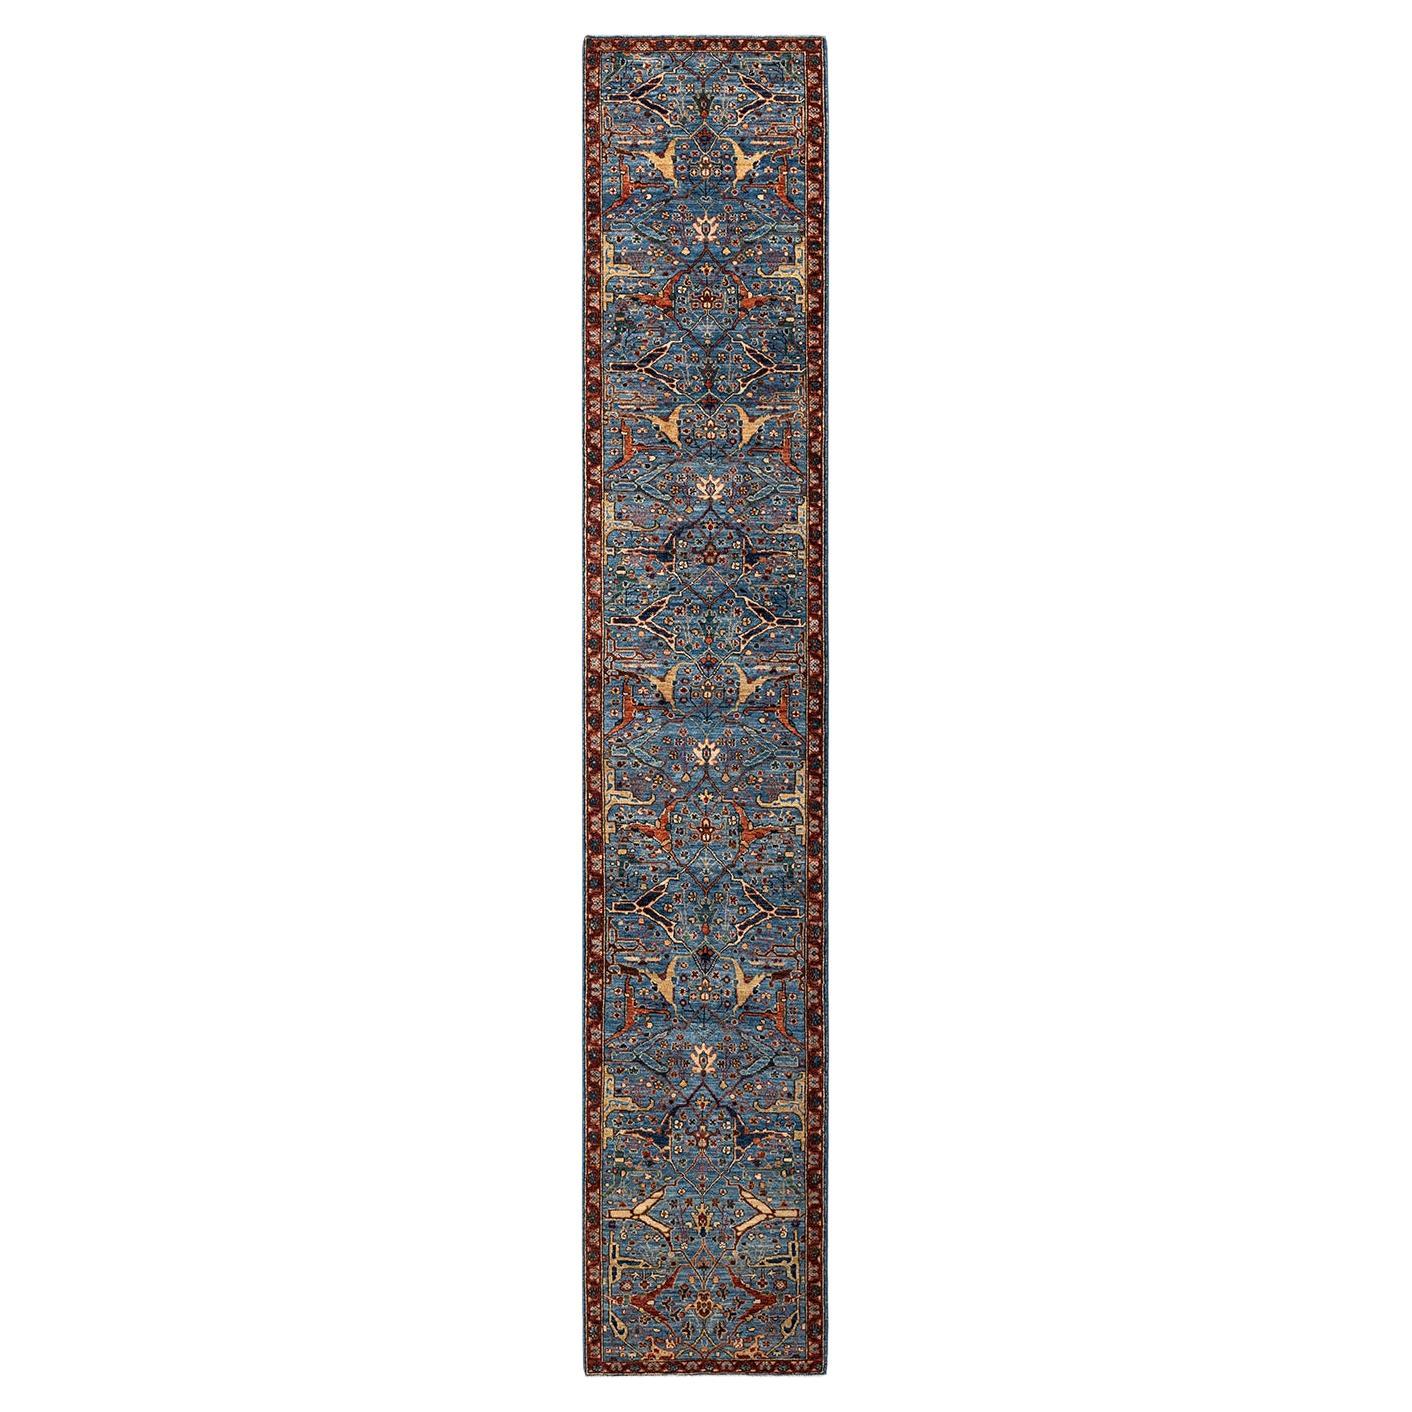 Serapi, One-of-a-kind Hand-Knotted Runner Rug, Light Blue